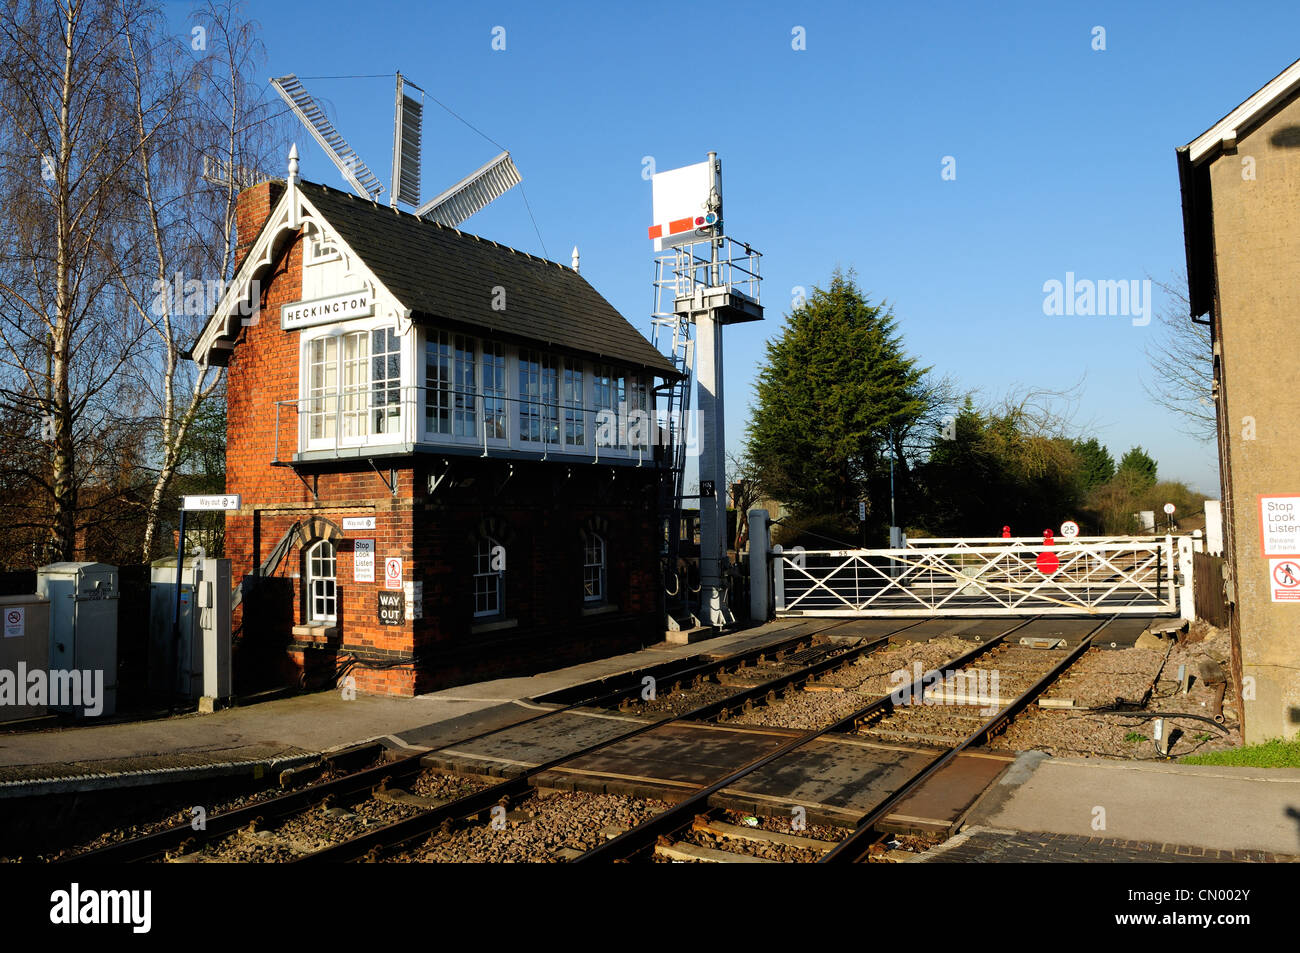 Heckington Village Lincolnshire England.Signal Box and Train Station.With Windmill. Stock Photo